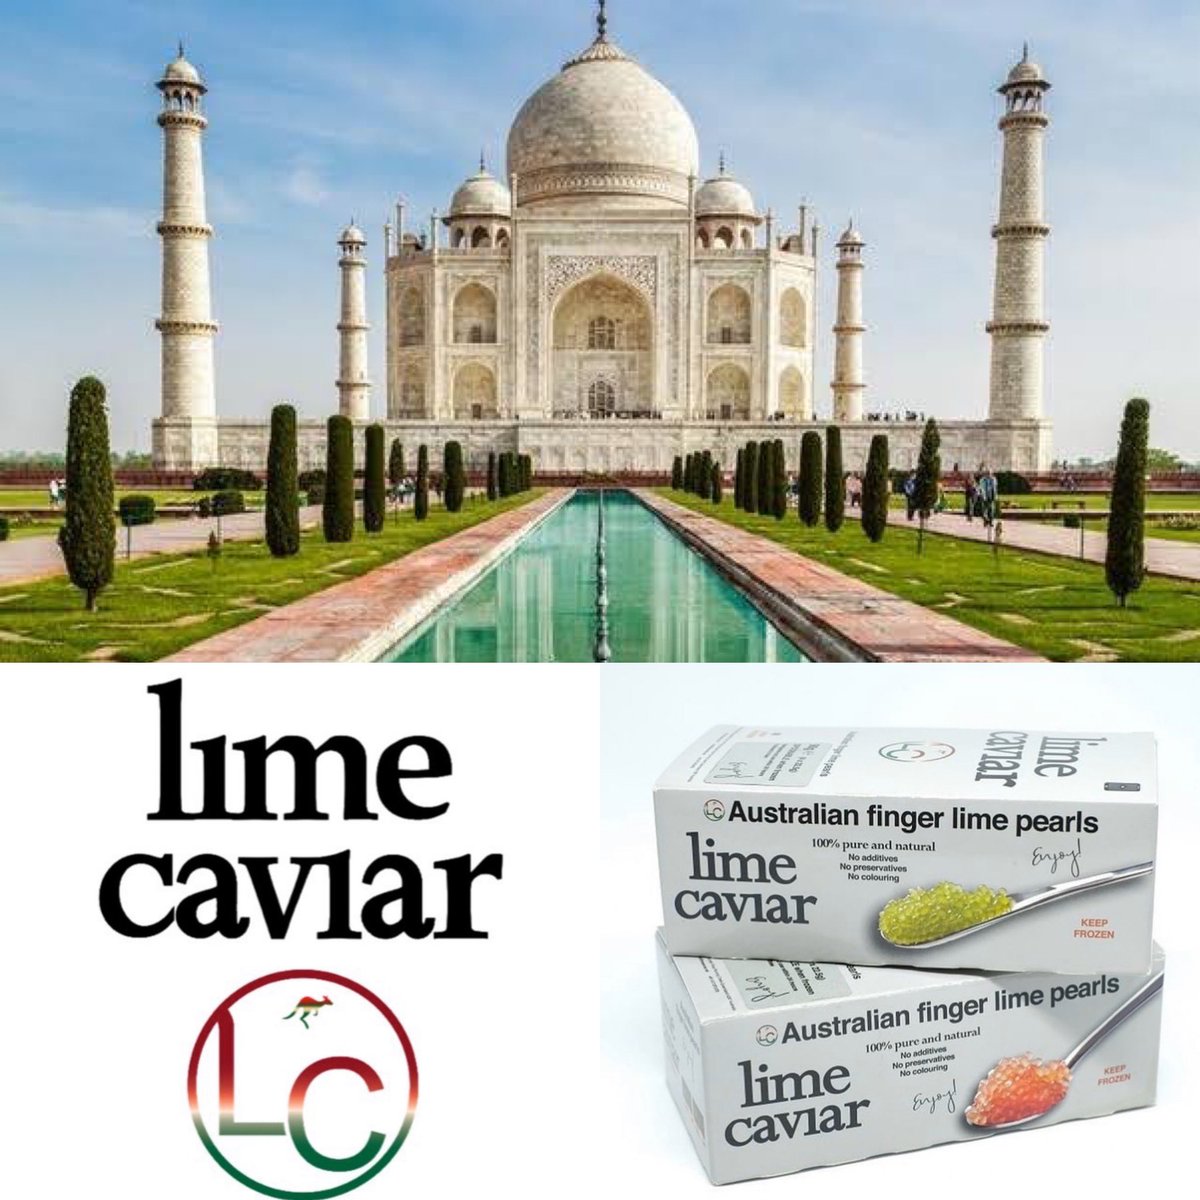 Our multi-award winning lime caviar is now being exported to Delhi, India 🇮🇳 More info: info@limecaviar.net #limecaviar #fingerlimes #india #indianfood #indianchefs #exportquality